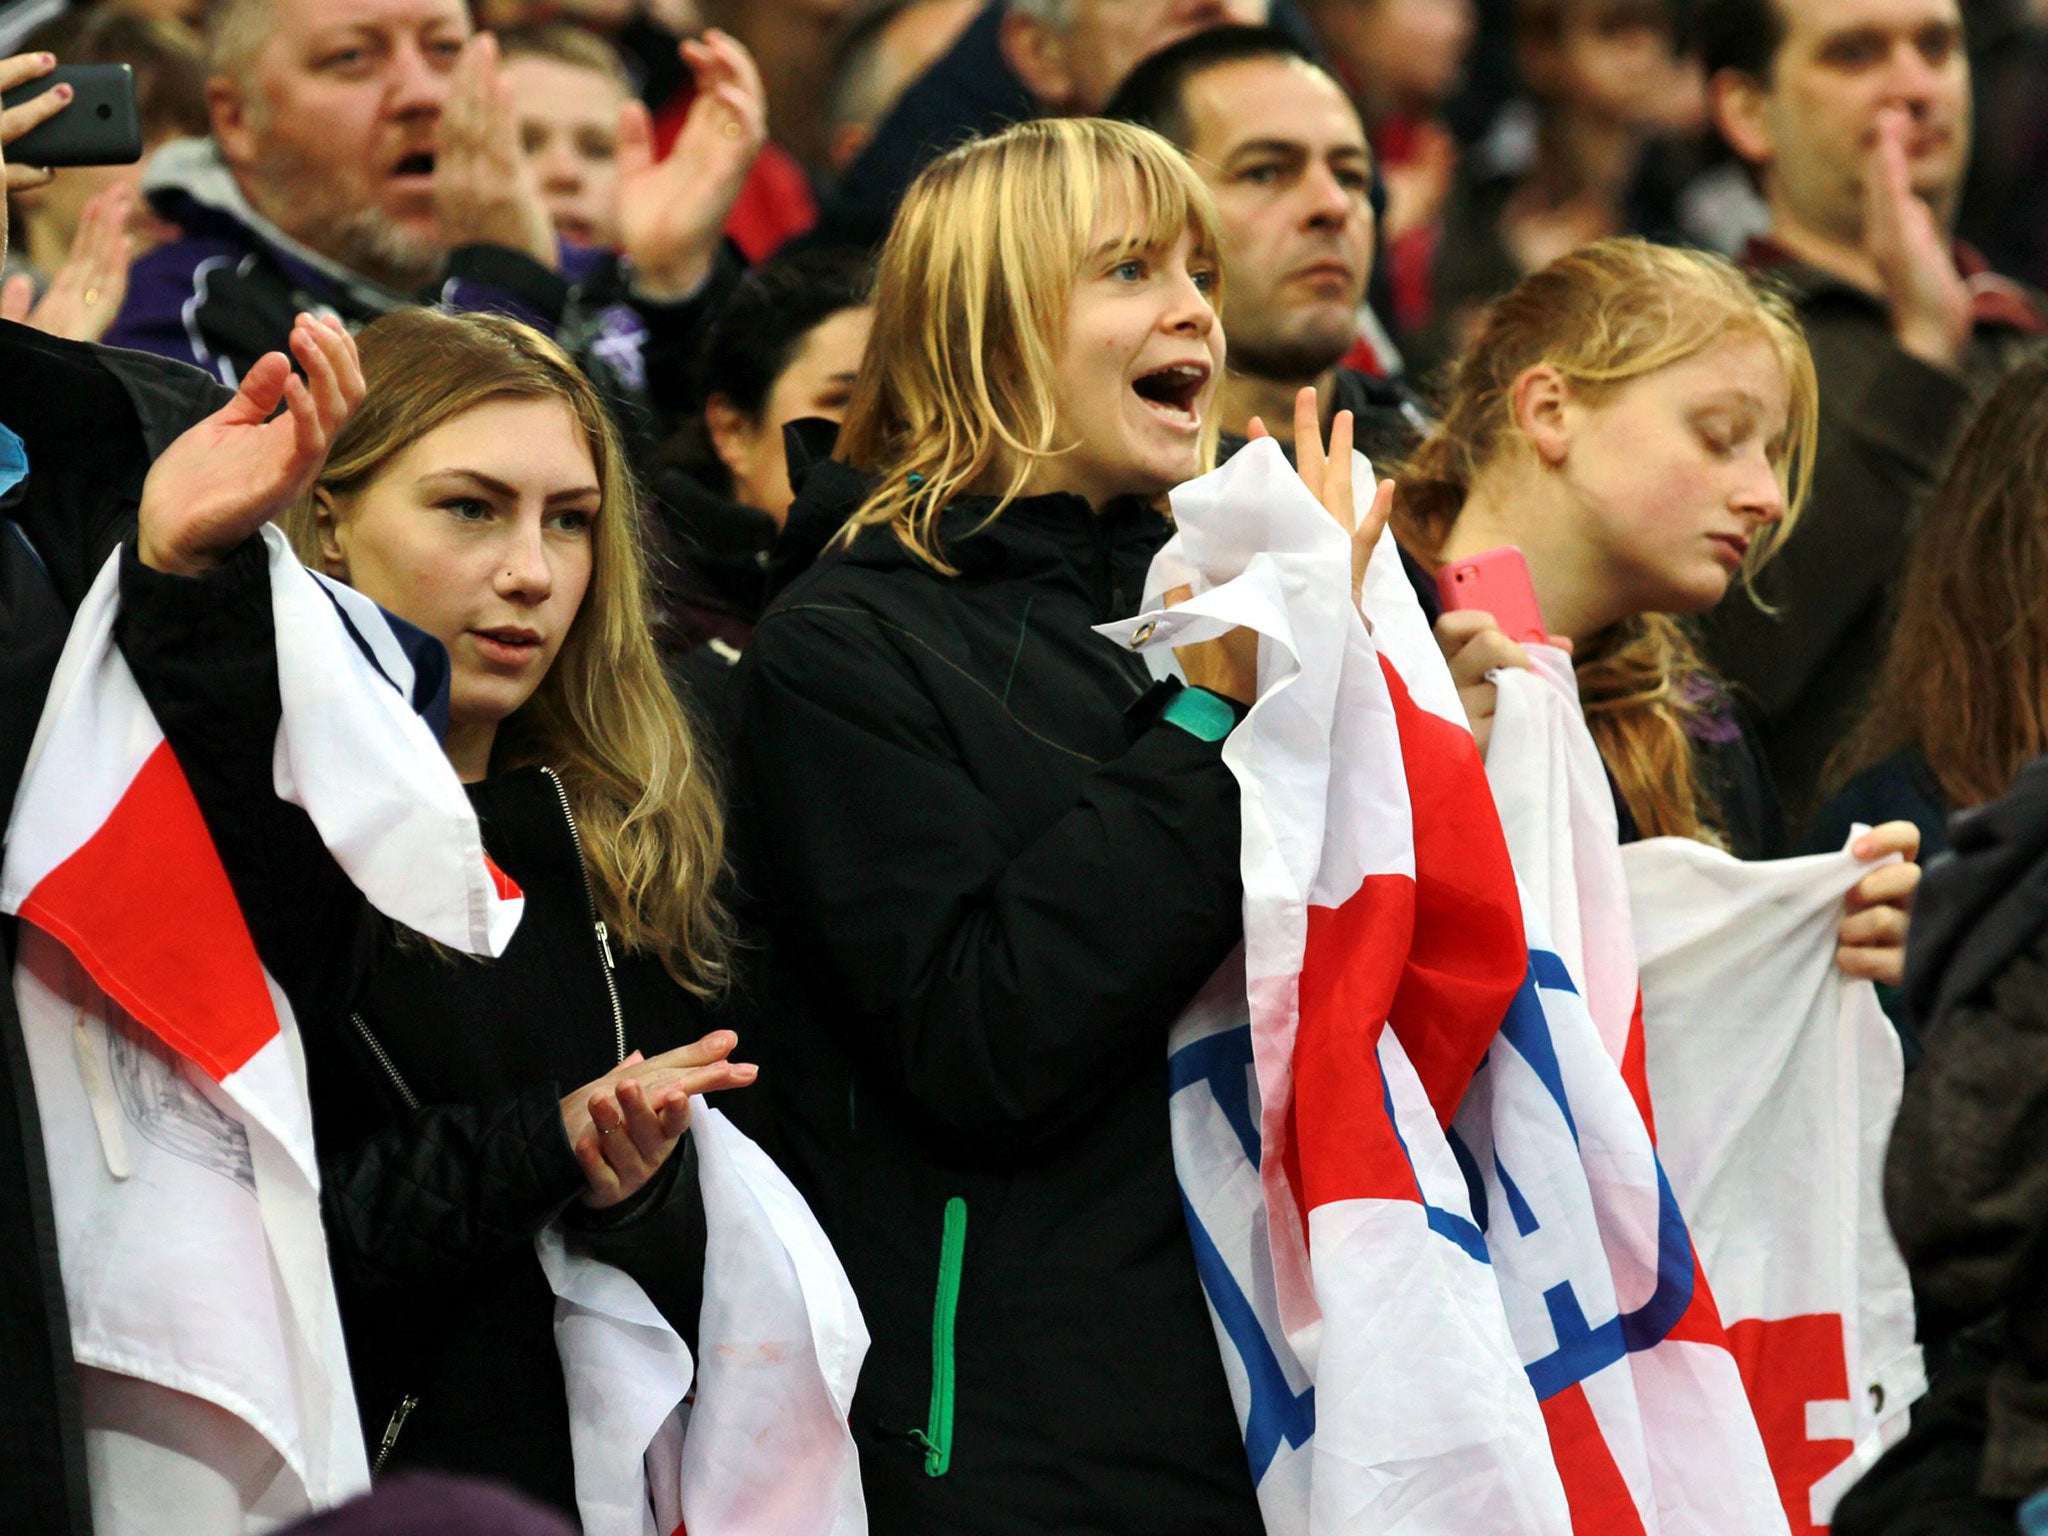 England fans show their loyalty before the friendly match against Germany at Wembley stadium